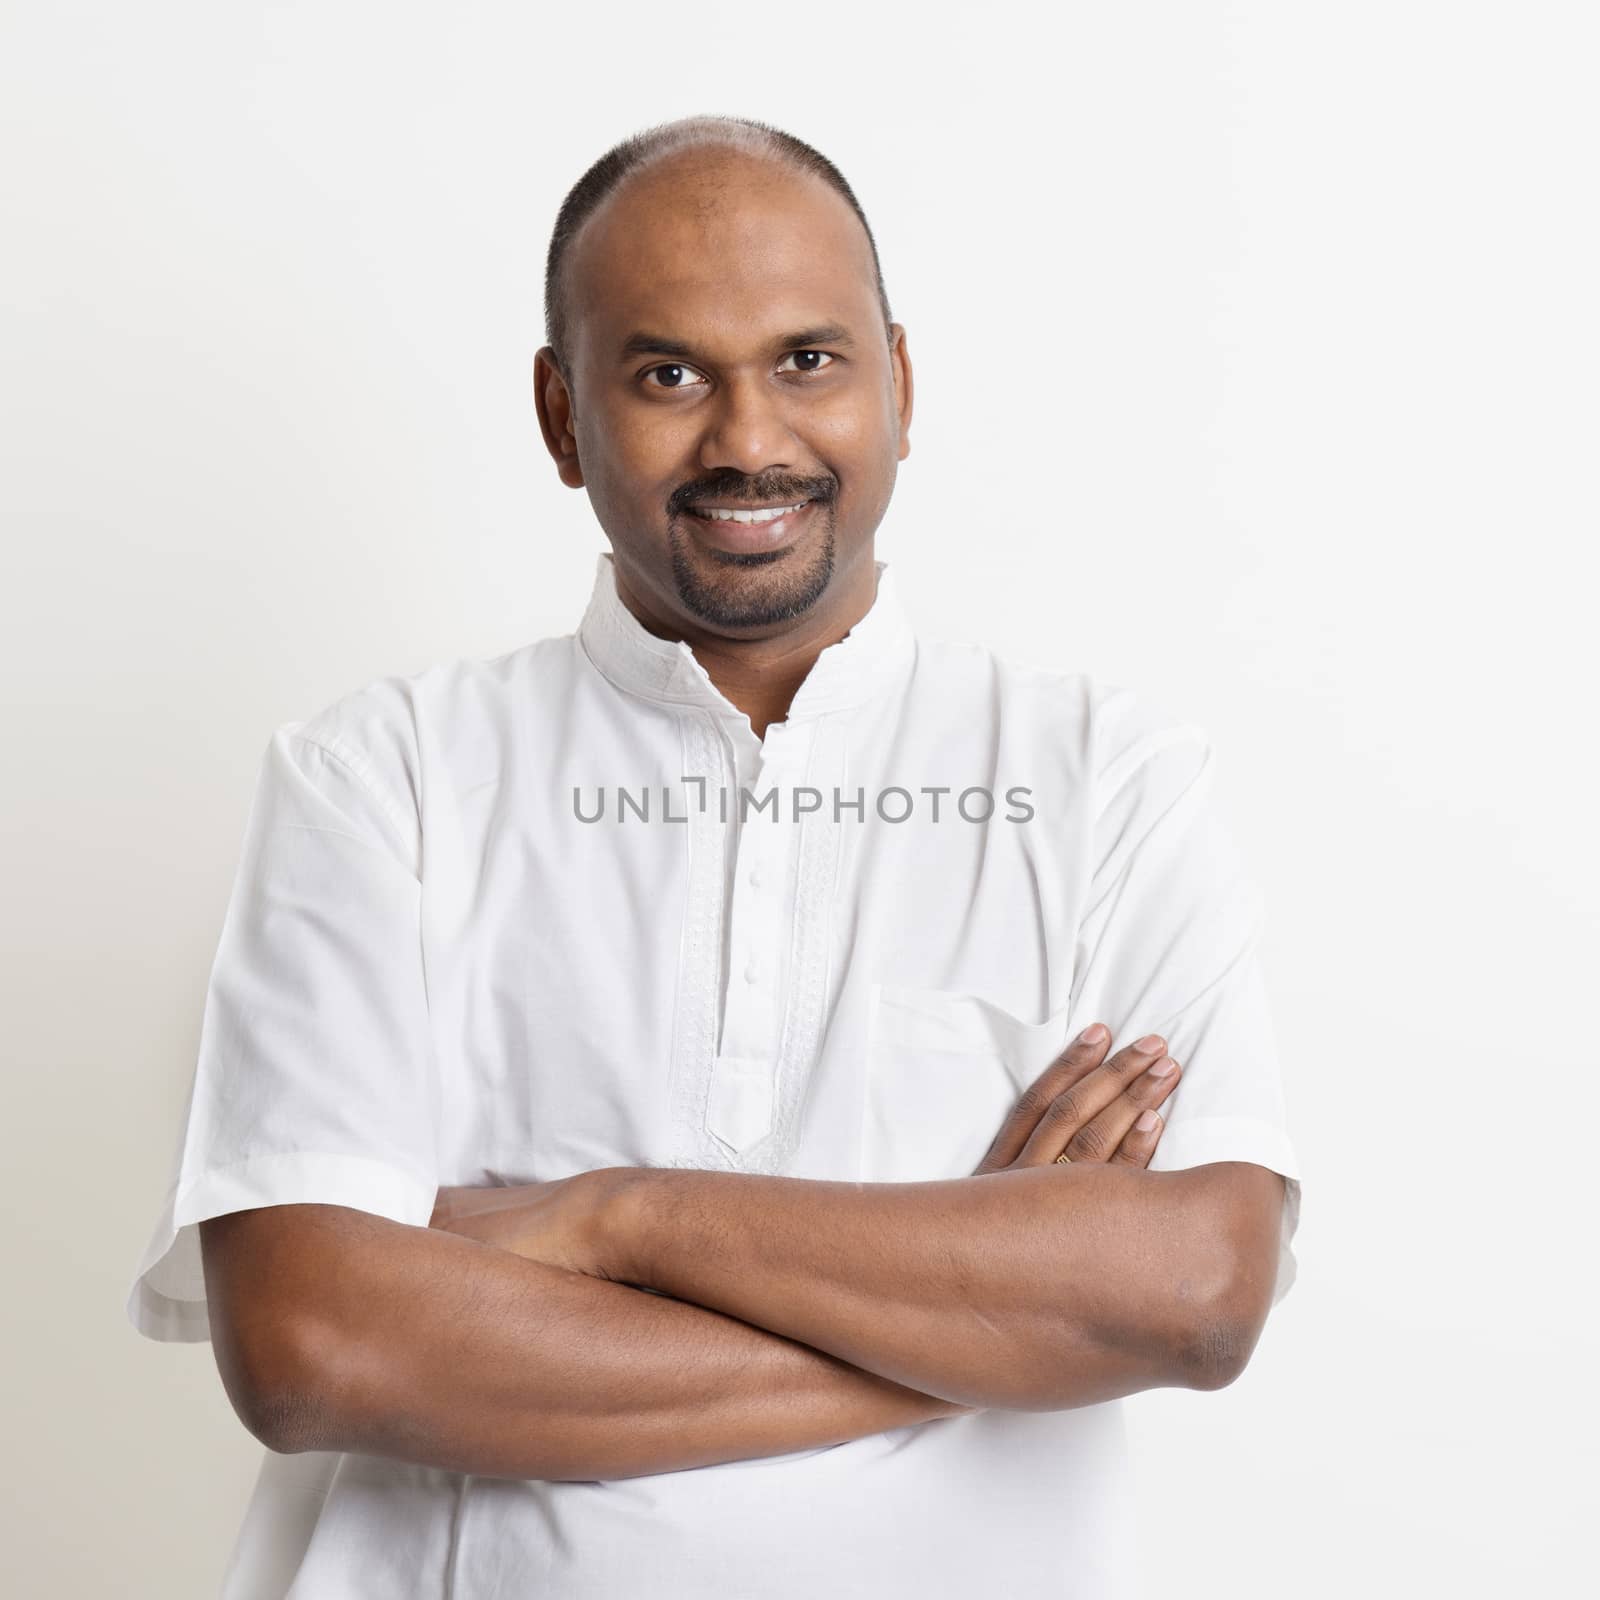 Portrait of mature casual business Indian man smiling, standing on plain background with shadow.